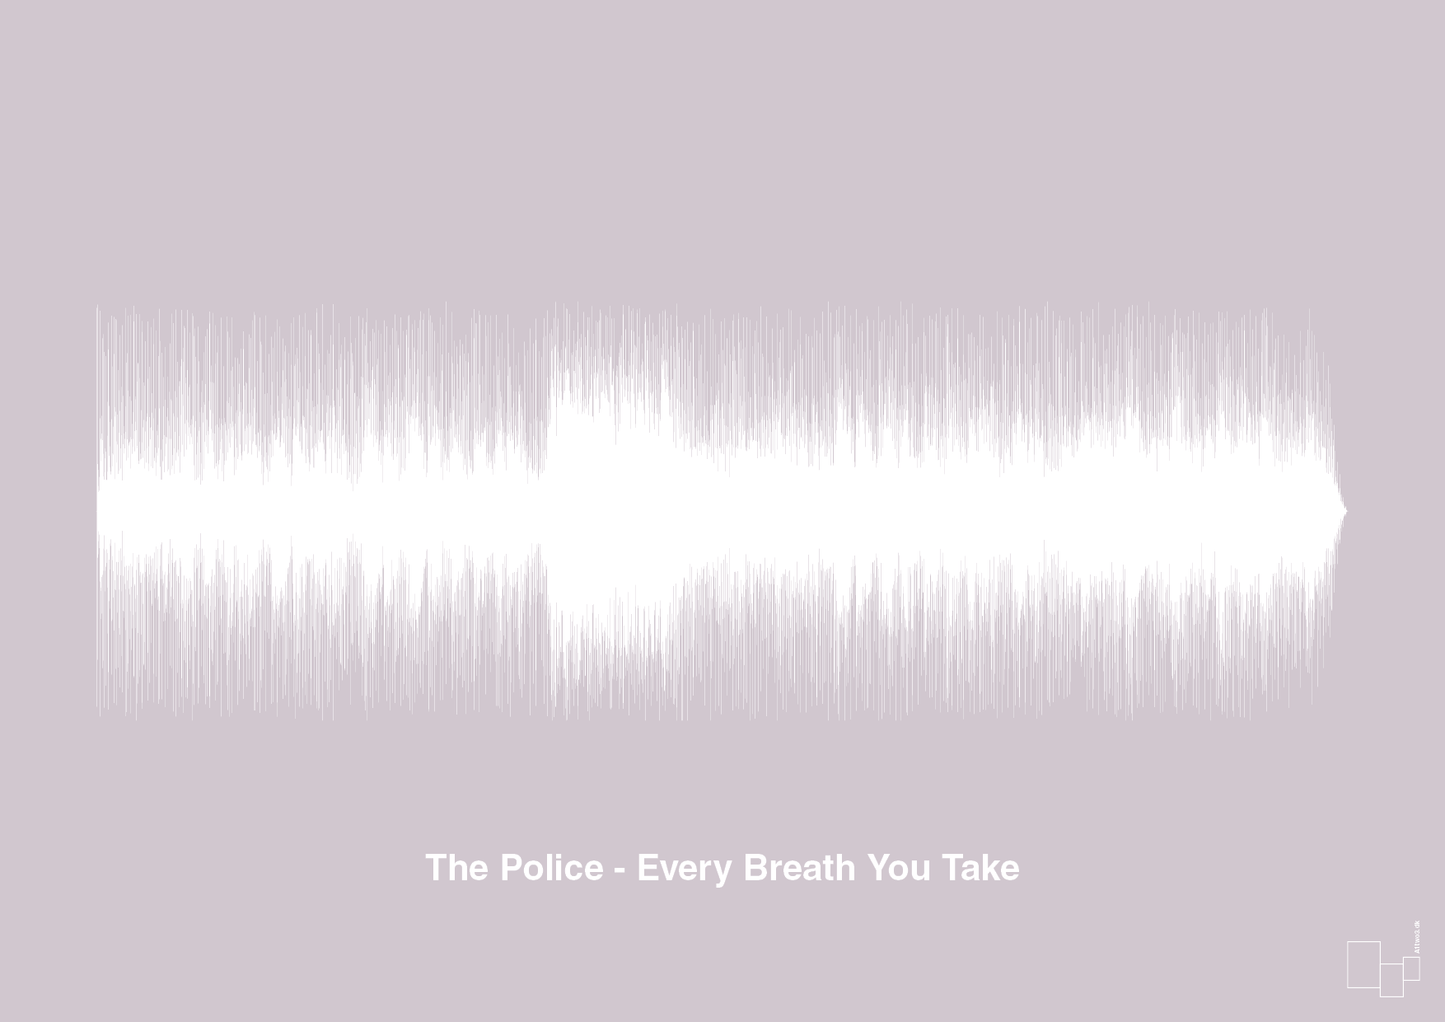 the police - every breath you take - Plakat med Musik i Dusty Lilac